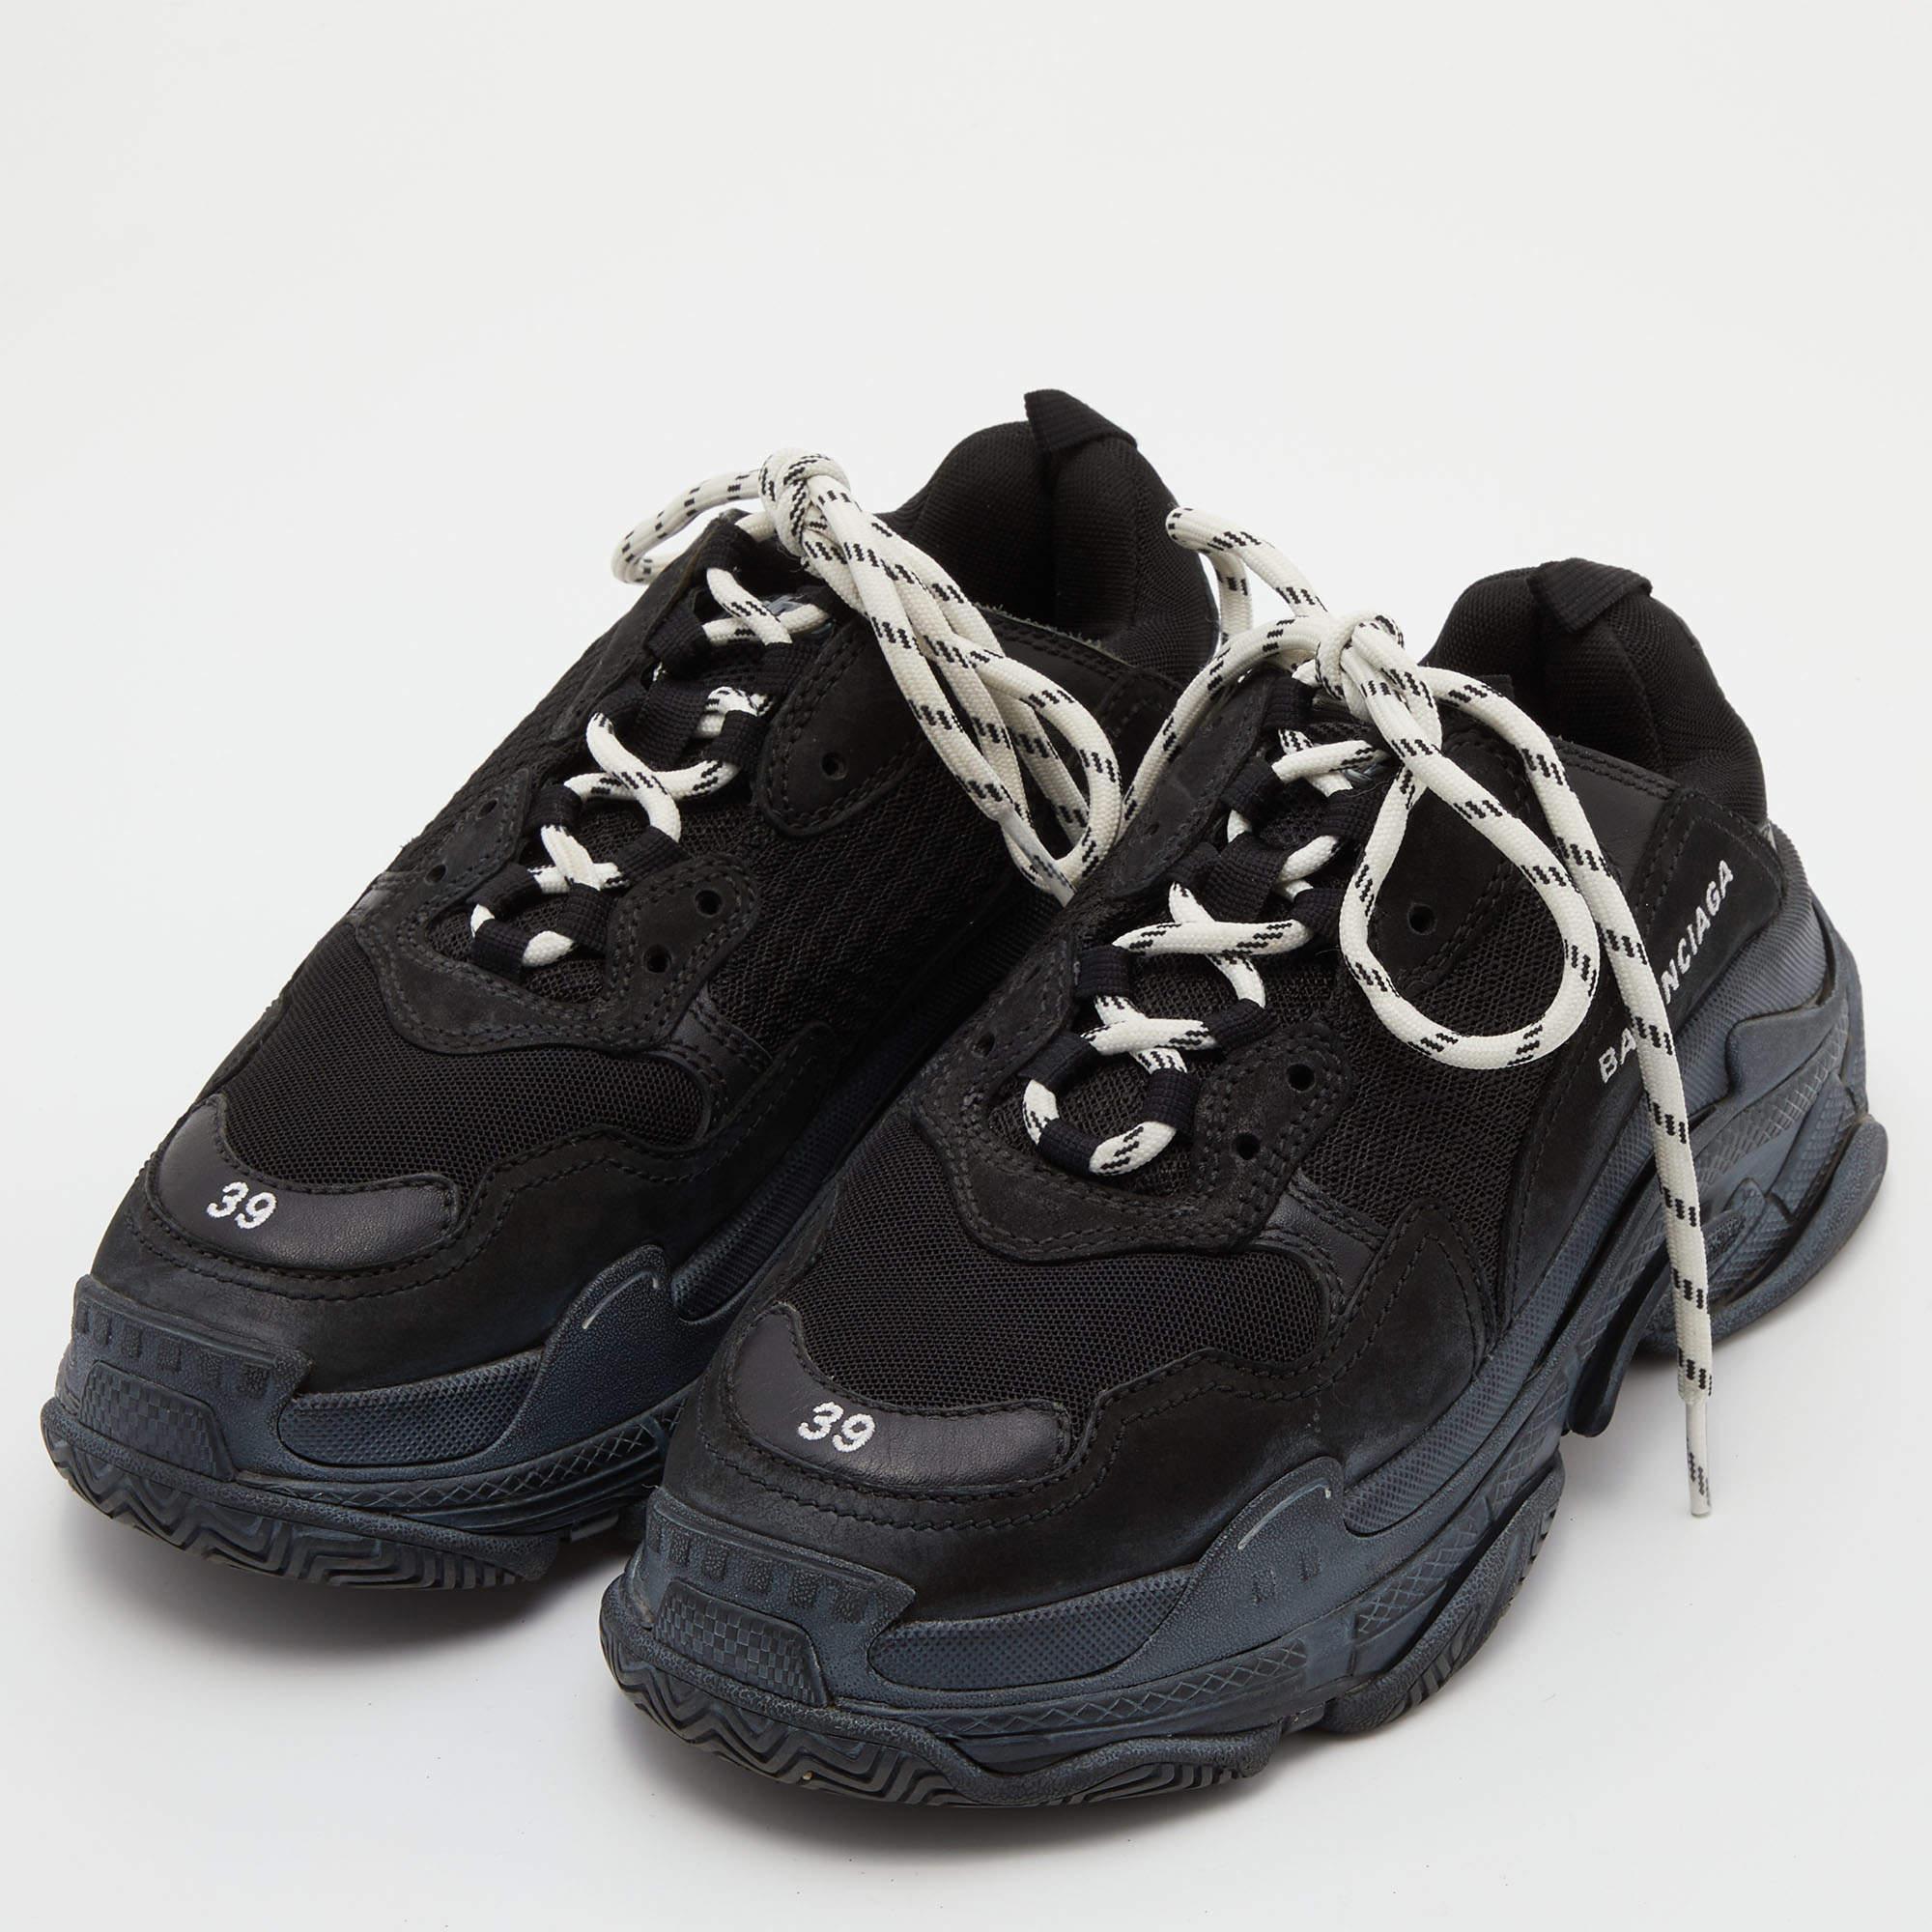 Men's Balenciaga Black Mesh and Leather Triple S Sneakers Size 39